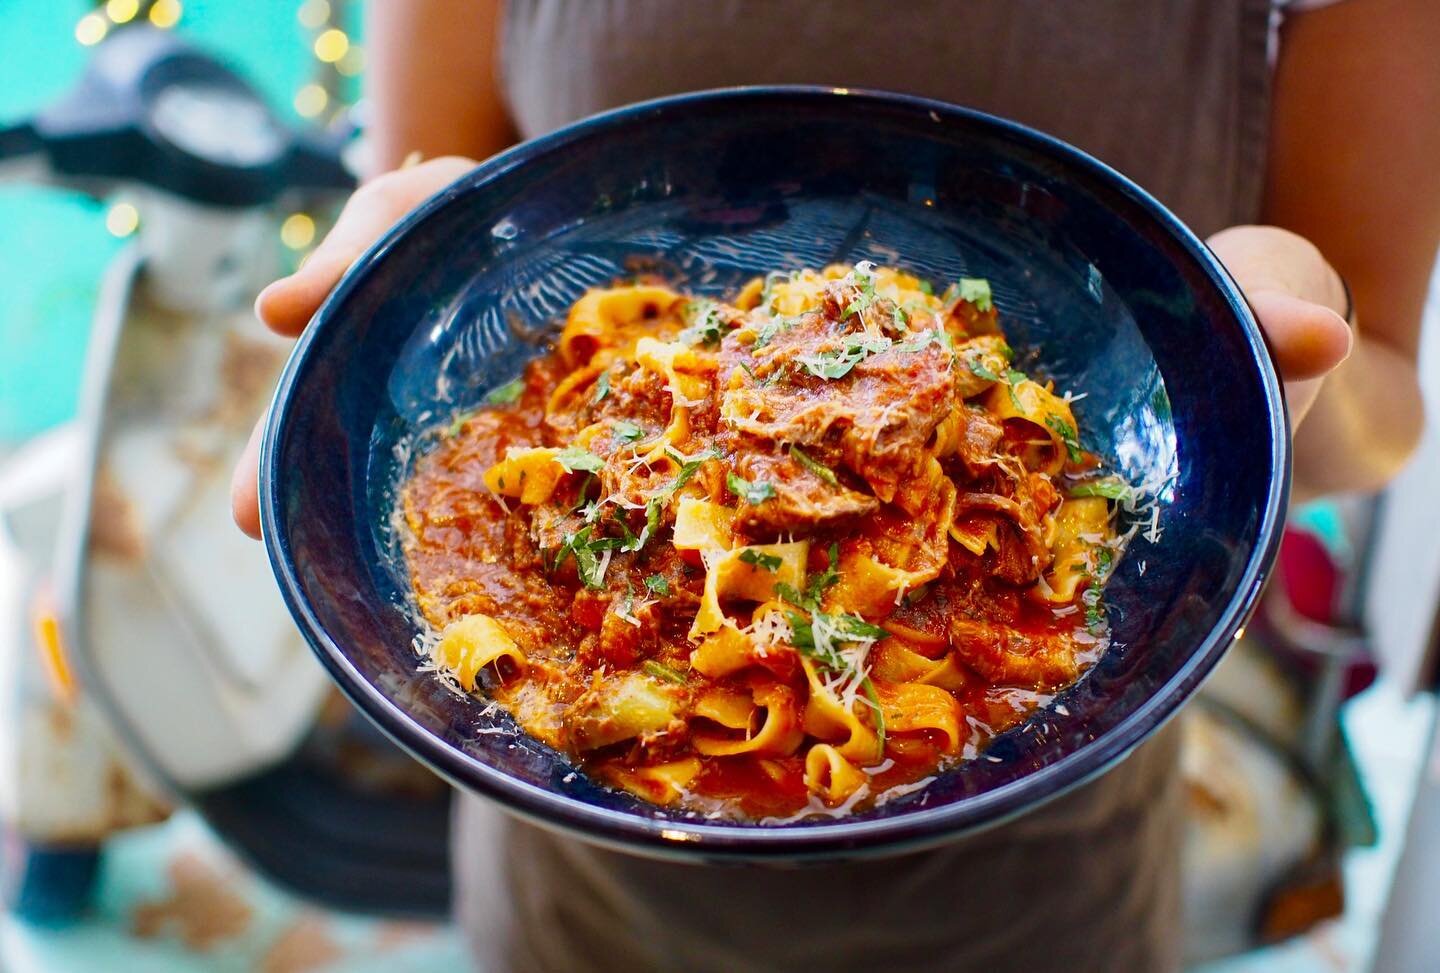 Our Lamb Ragout is a winter treat 😋 Available for dinner from 5pm.
&mdash;&mdash;&mdash;
#noosa #lamb #ragout #hastingsstreet #foodie #pasta